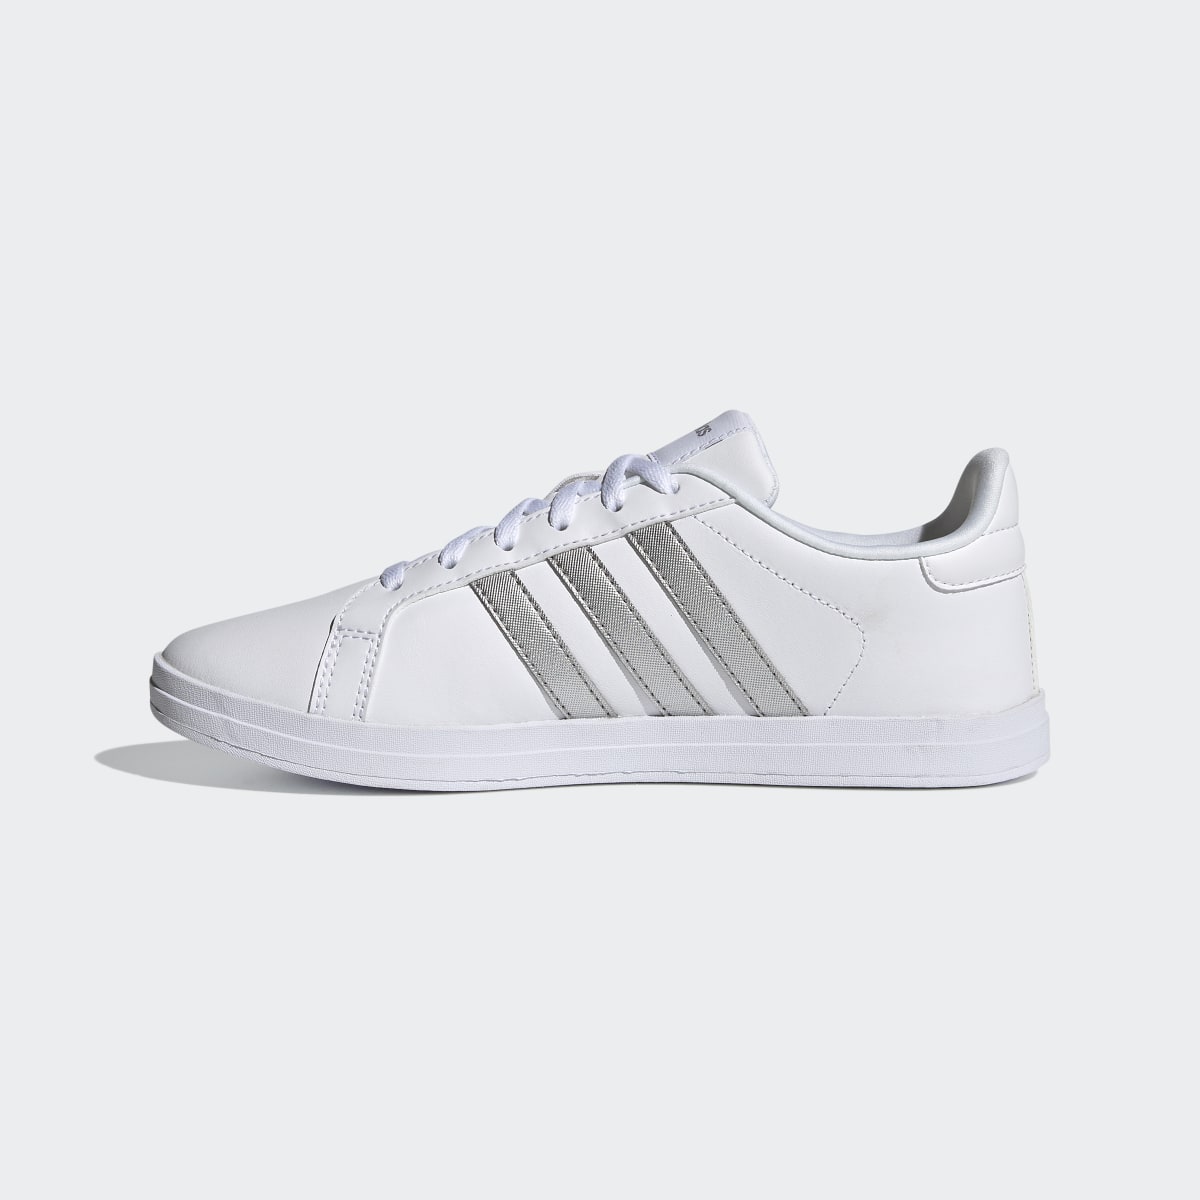 Adidas Sapatilhas Courtpoint. 7